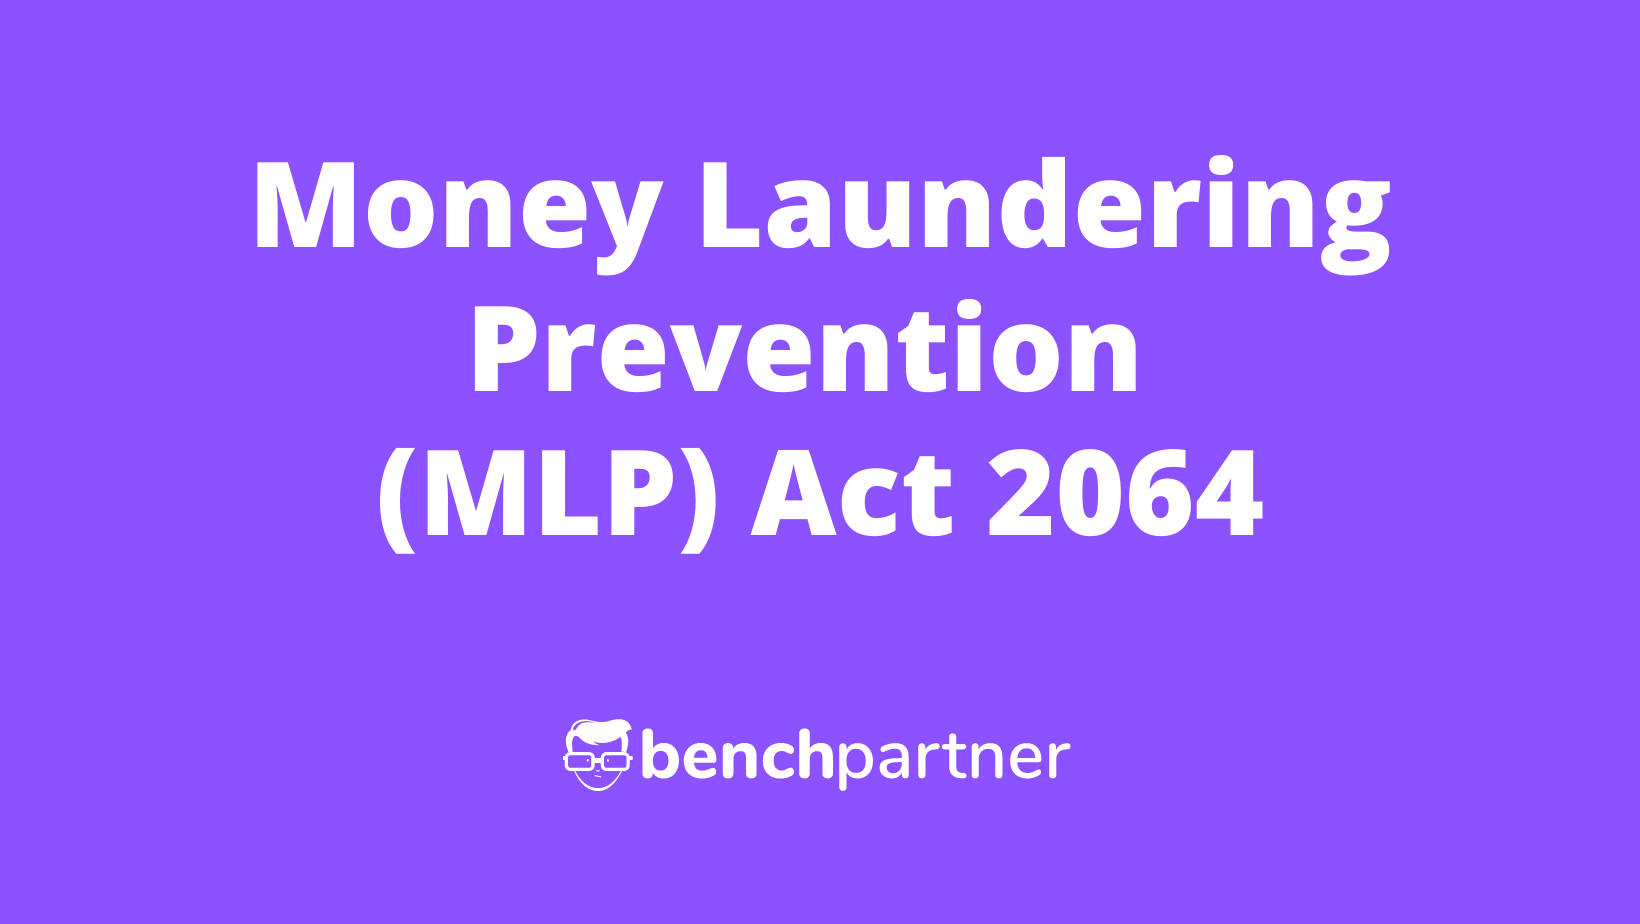 Money Laundering Prevention Act 2064 (MLP Act)